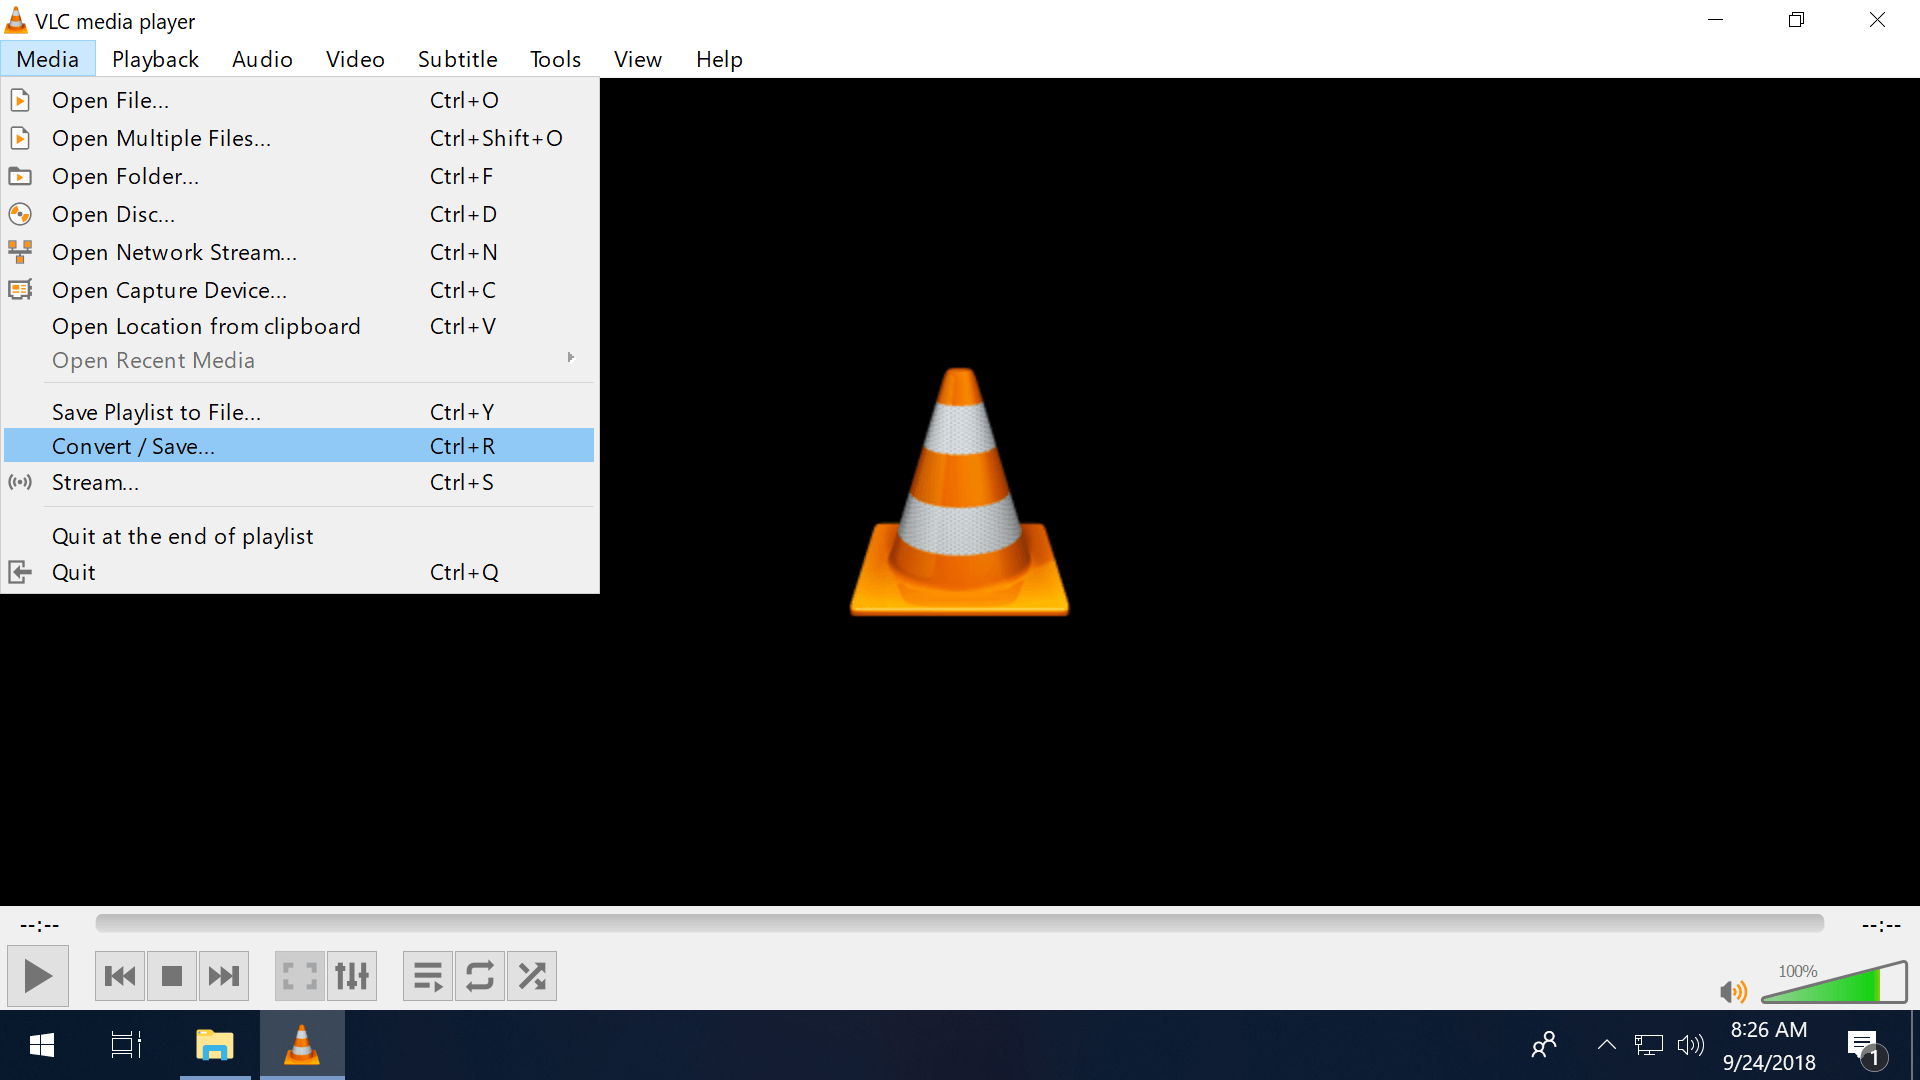 Download and install an alternative media player such as VLC media player.
Open the video file using the new media player.